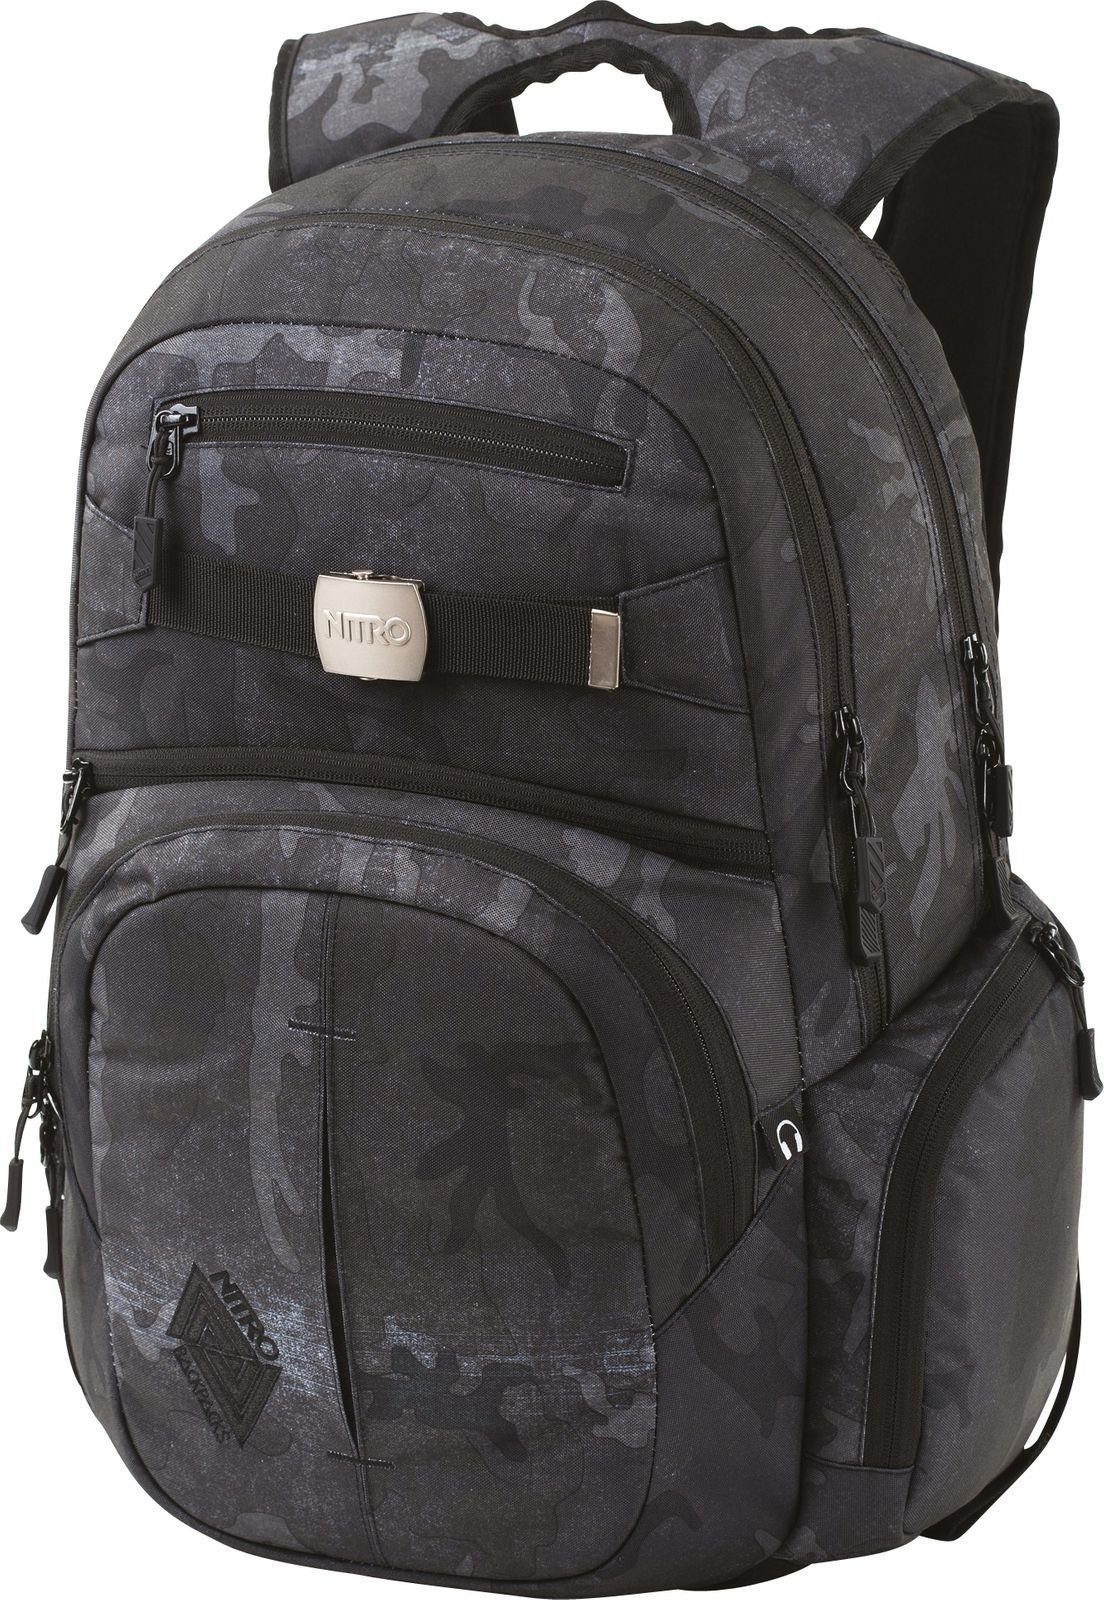 Camo Forged Daypacker Rucksack Collection NITRO